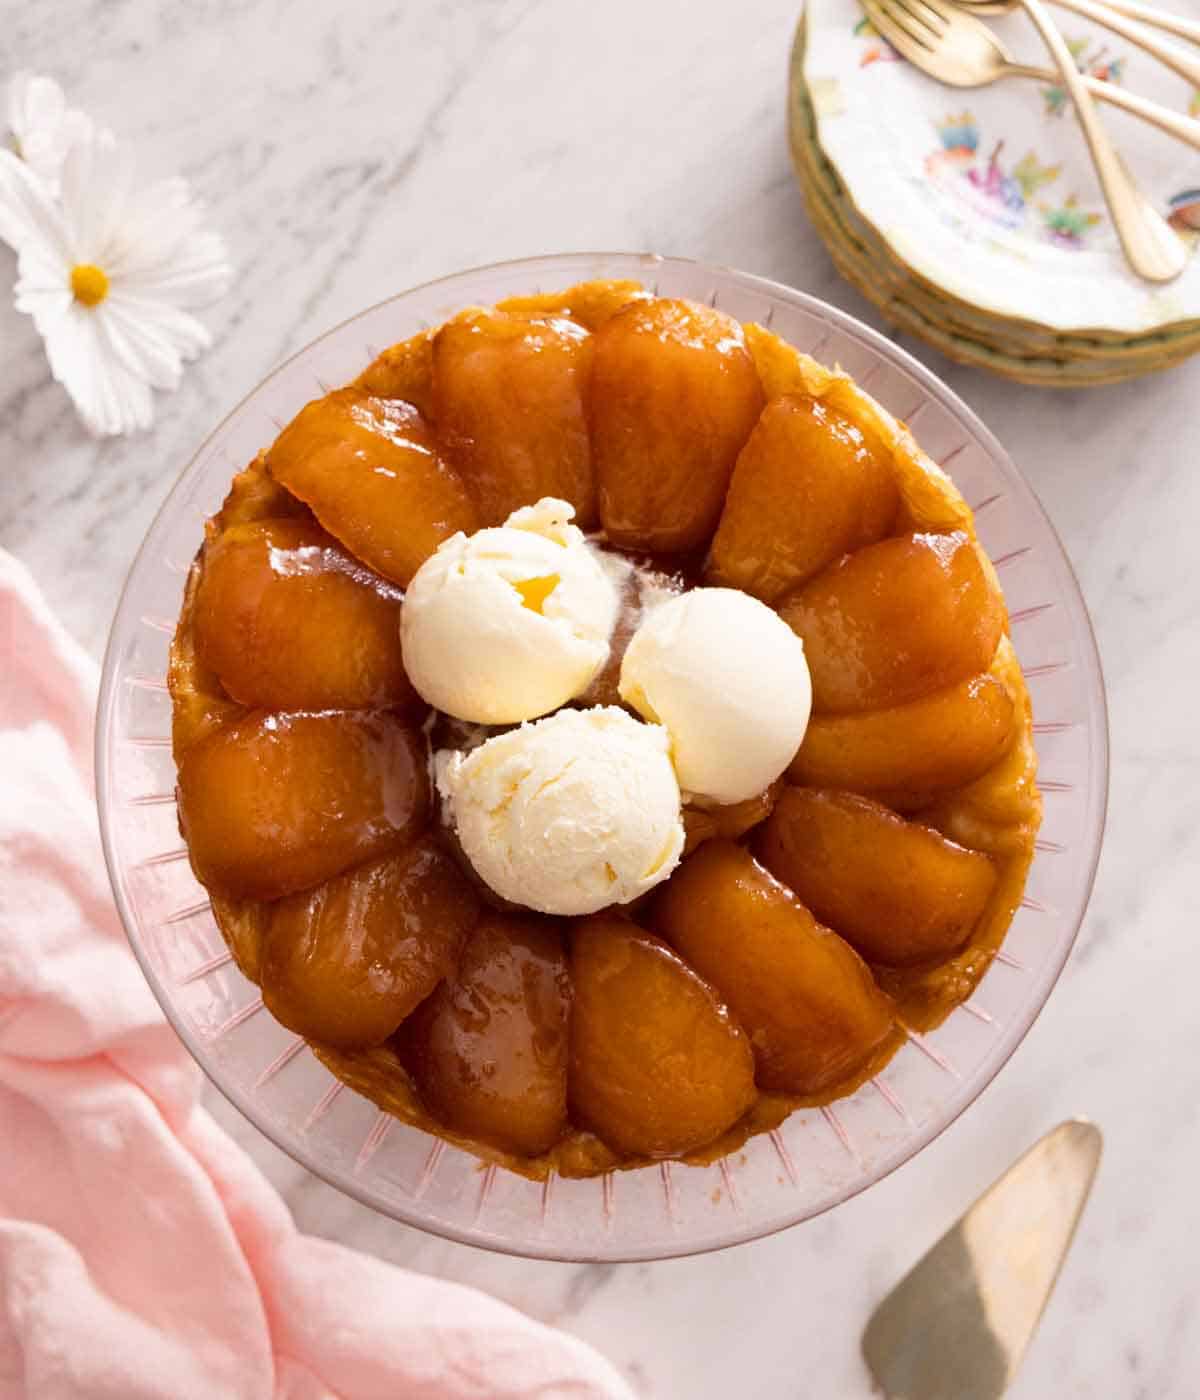 Overhead view of a tarte Tatin with three scoops of vanilla ice cream on top.